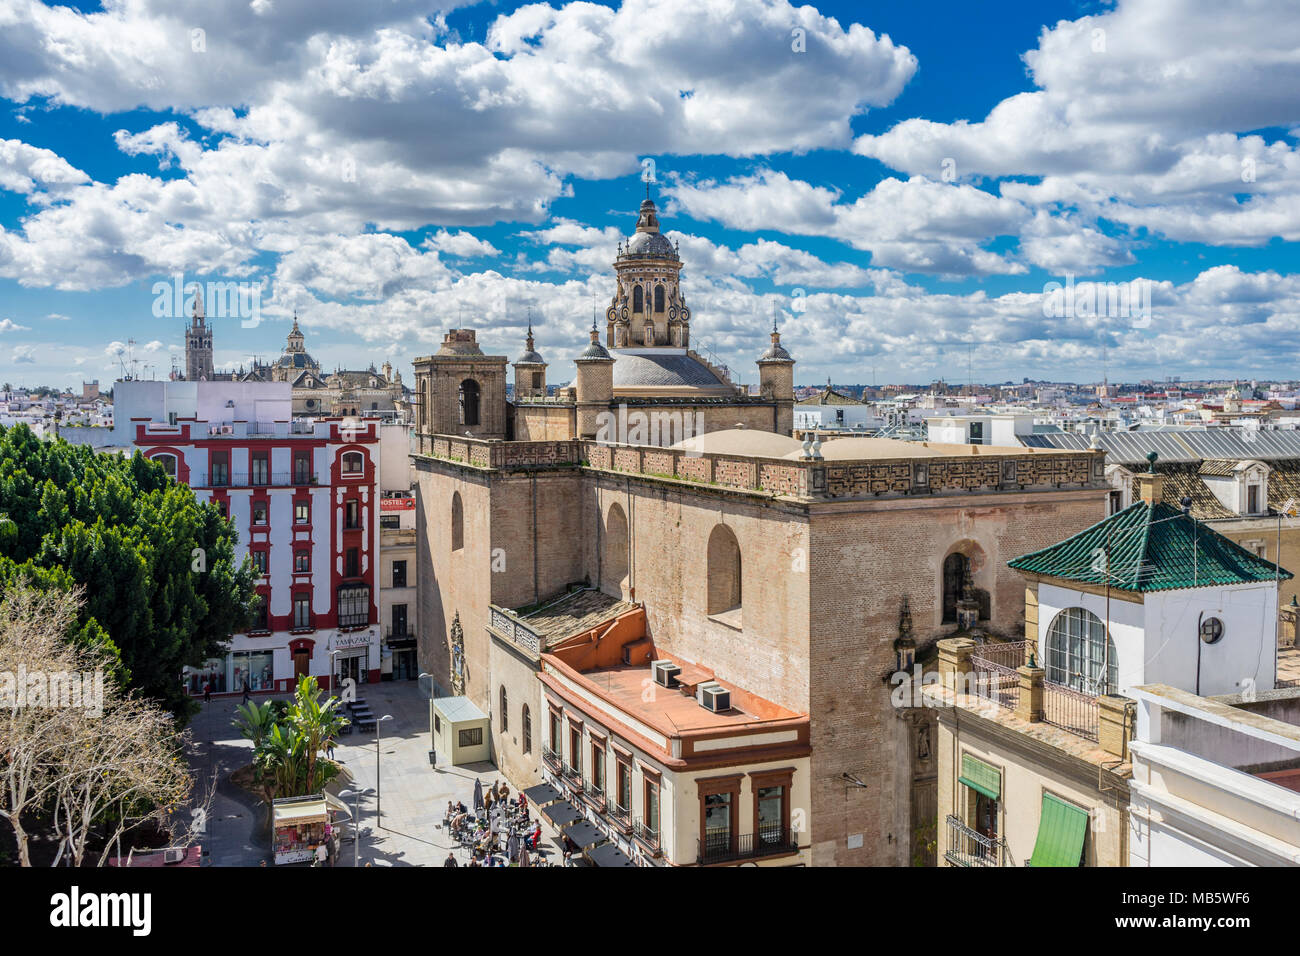 Cityscape view with Iglesia de la Anunciación (Annunciation Church) and the Seville cathedral Giralda bell tower, March 2018, Seville, Stock Photo